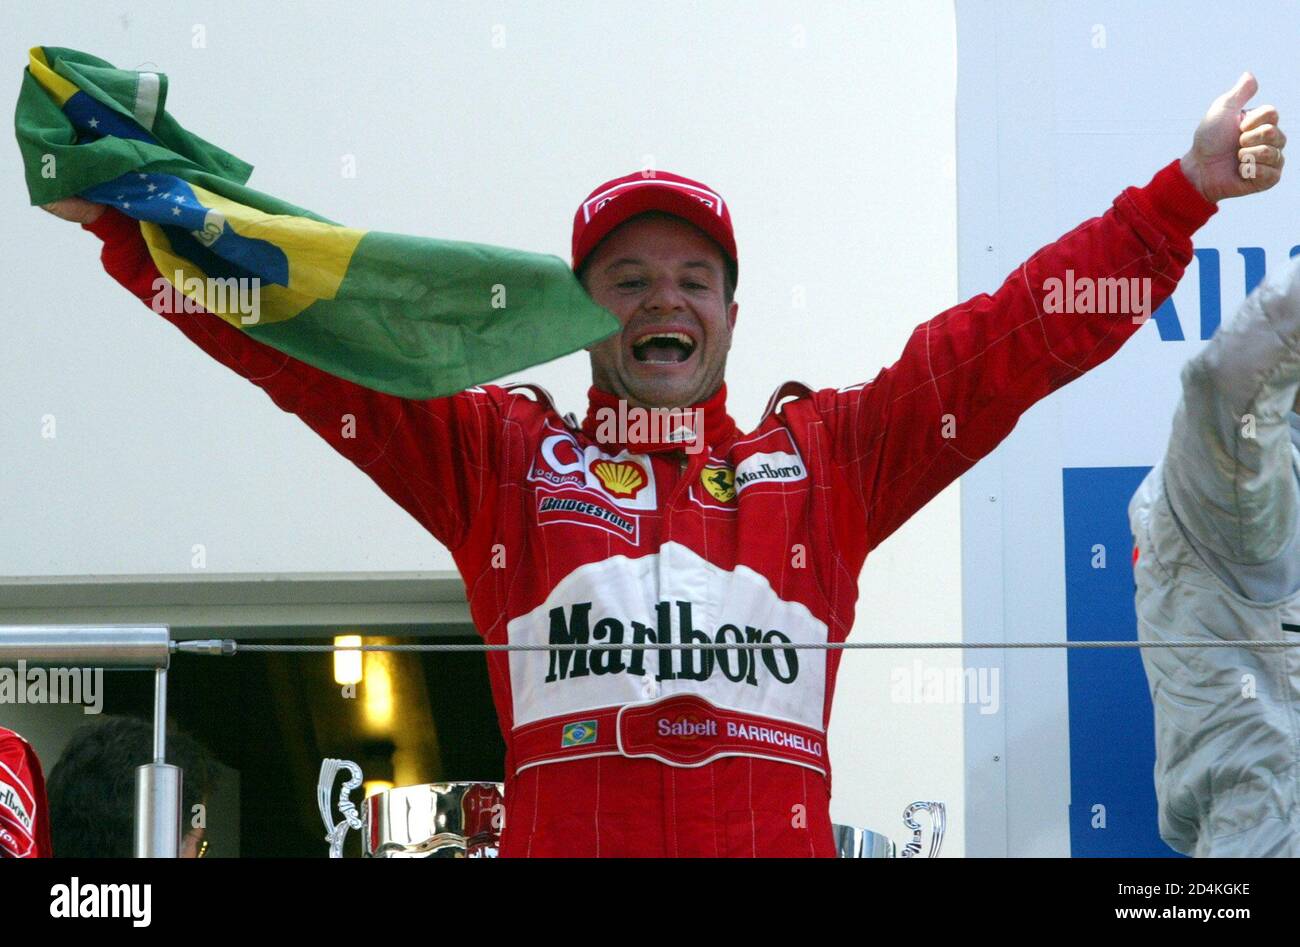 Brazilian Formula One driver Rubens Barrichello of team Ferrari holds up a Brazilian flag as he celebrates after the European Grand Prix at the Nuerburgring June 23, 2002. [Barrichello won the race followed by his team mate Michael Schumacher who placed second and Kimi Raikkonen of team McLaren Mercedes who placed third.] Stock Photo